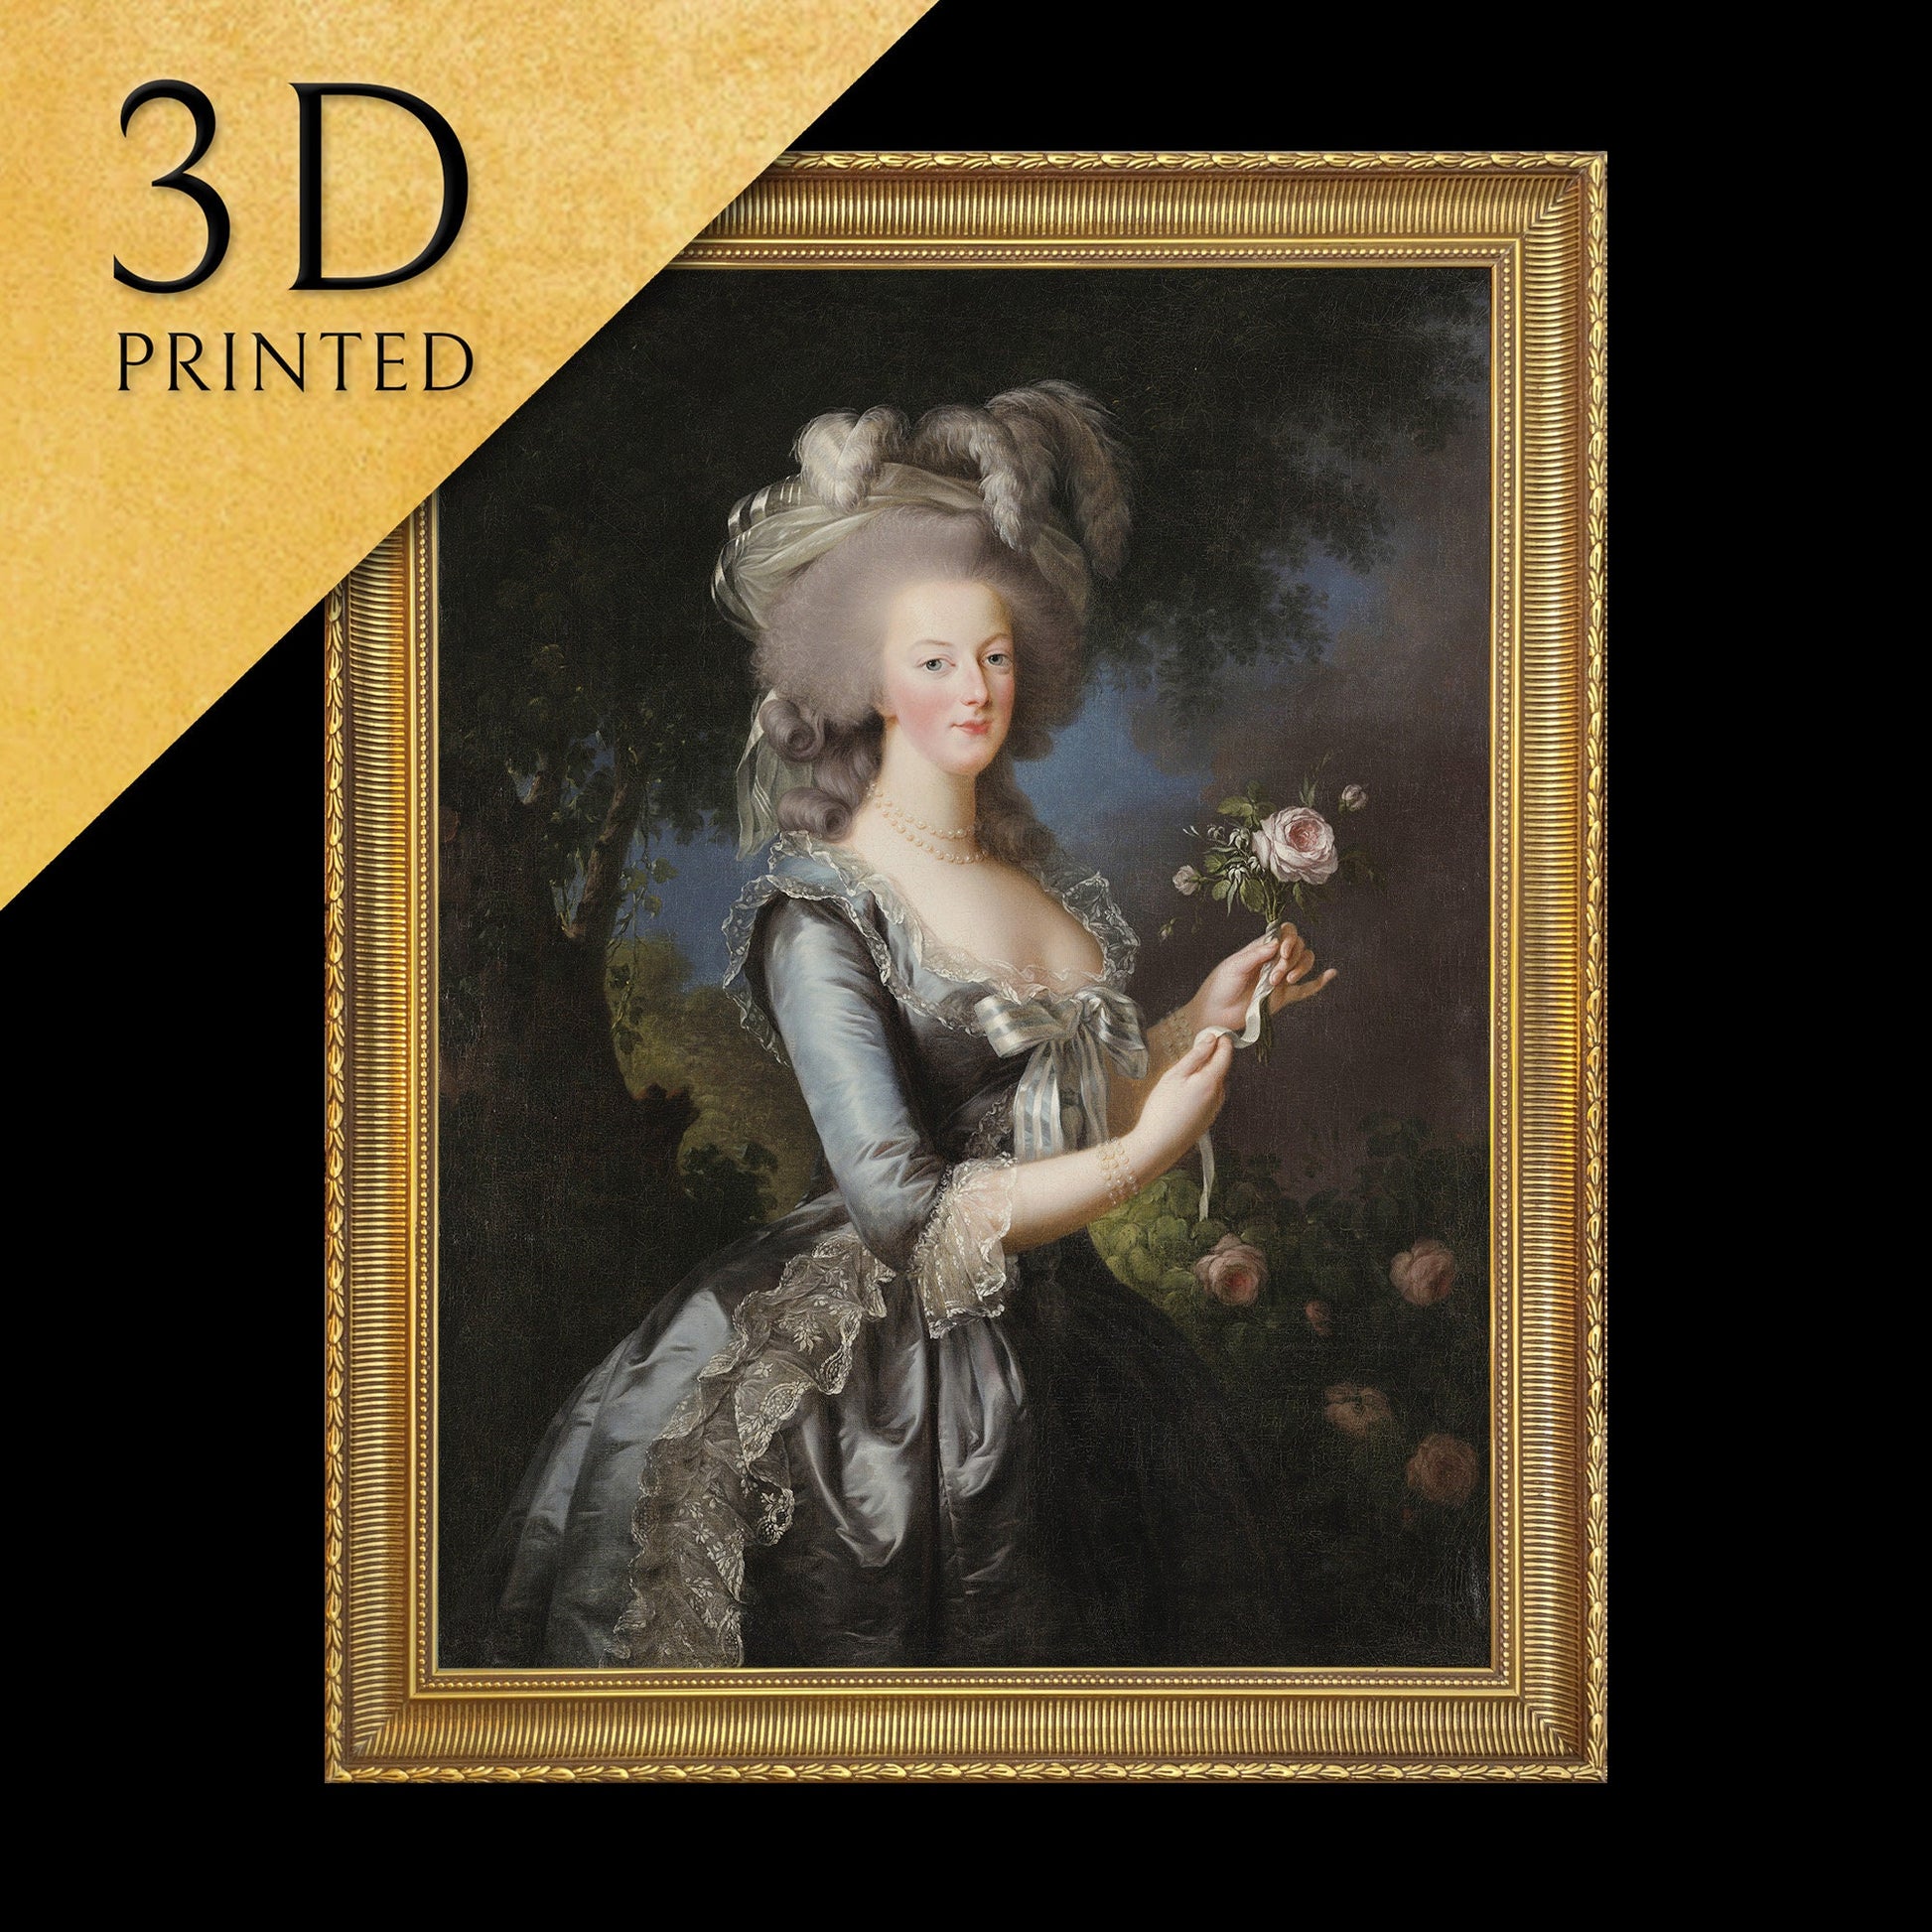 Marie-Antoinette by Élisabeth Vigée Le Brun-Marie, 3d Printed with texture and brush strokes looks like original oil-painting, code:452